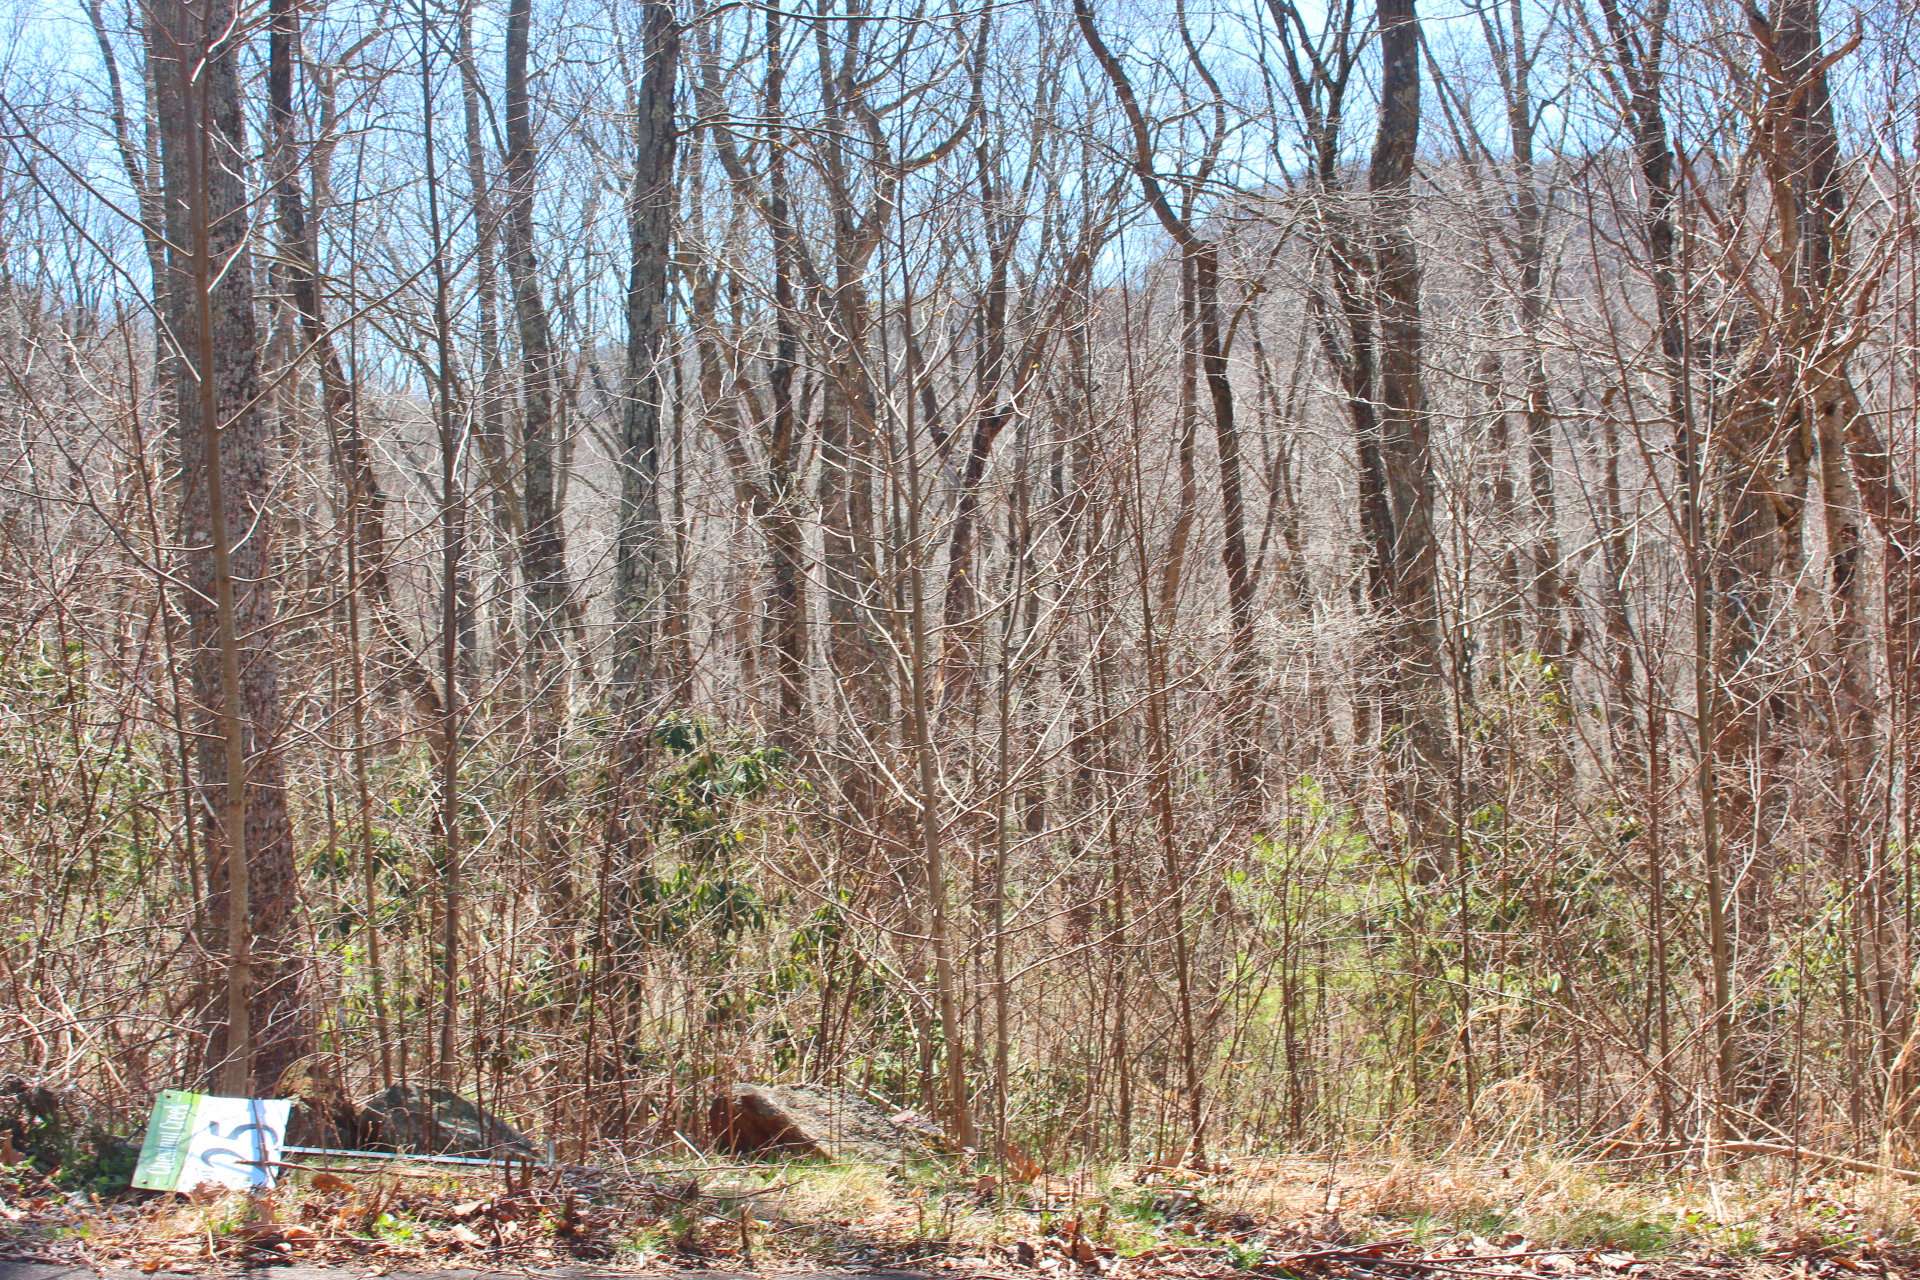 Lots 24 and 25 of Shatley Mountain Estates is now available for a spectacular 1.87 acre home site in Southern Ashe County.